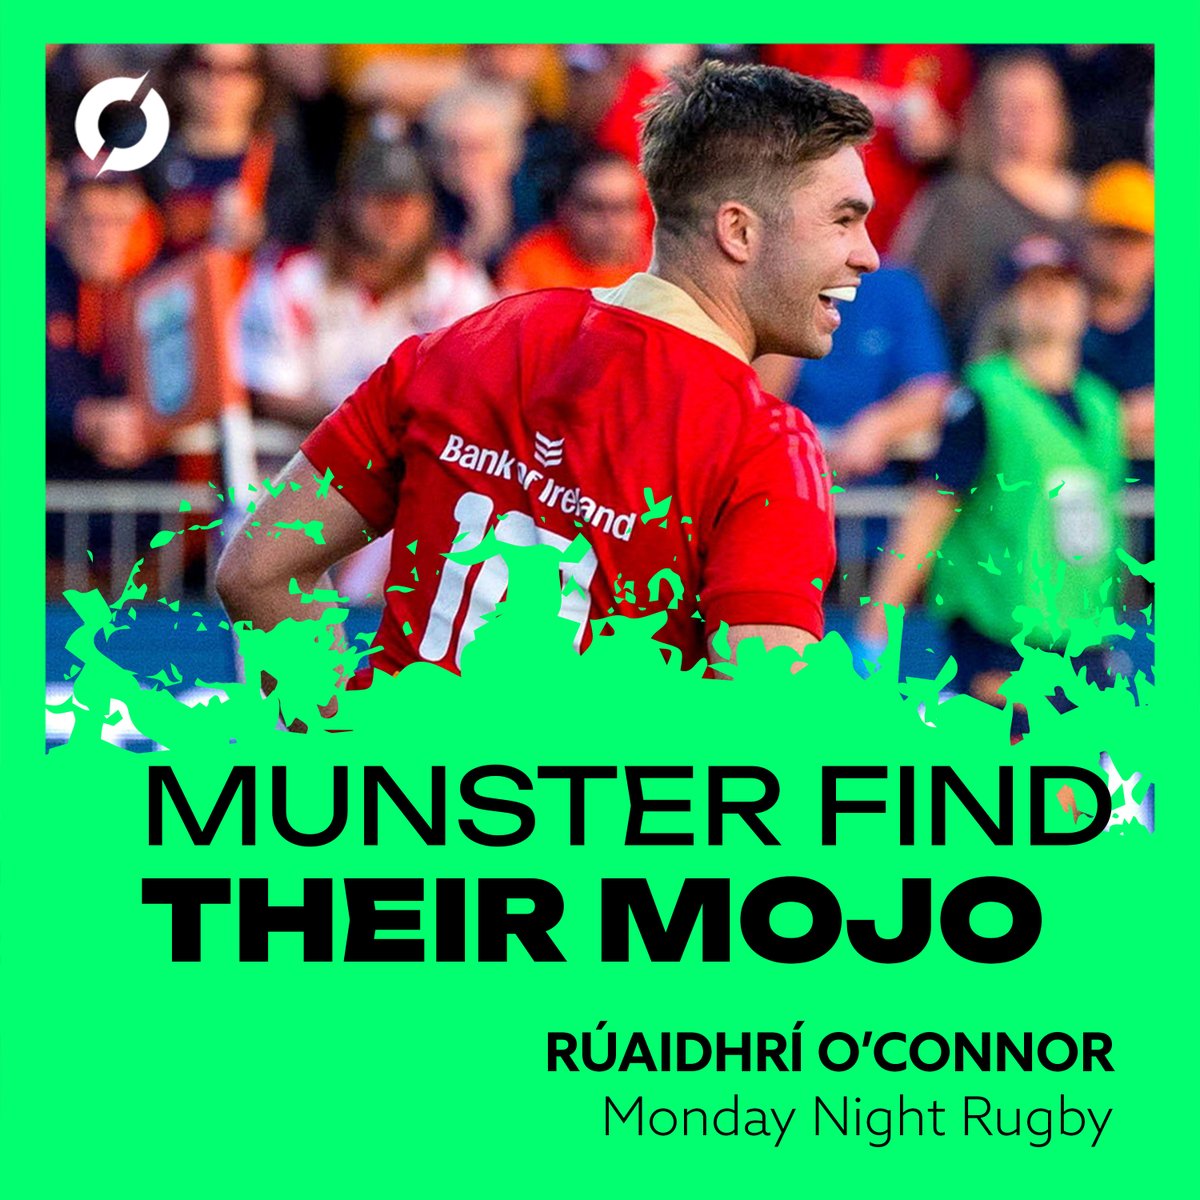 🎧 PODCAST 🎧 𝑹𝒖𝒈𝒃𝒚 𝒐𝒏 𝑶𝒇𝒇 𝑻𝒉𝒆 𝑩𝒂𝒍𝒍! Rúaidhrí O'Connor joined us on Monday Night Rugby: ✅ Munster's swagger is back ✅ Leinster's decision-making ✅ Ulster come good LISTEN ➡️ podcasts.apple.com/us/podcast/mnr…